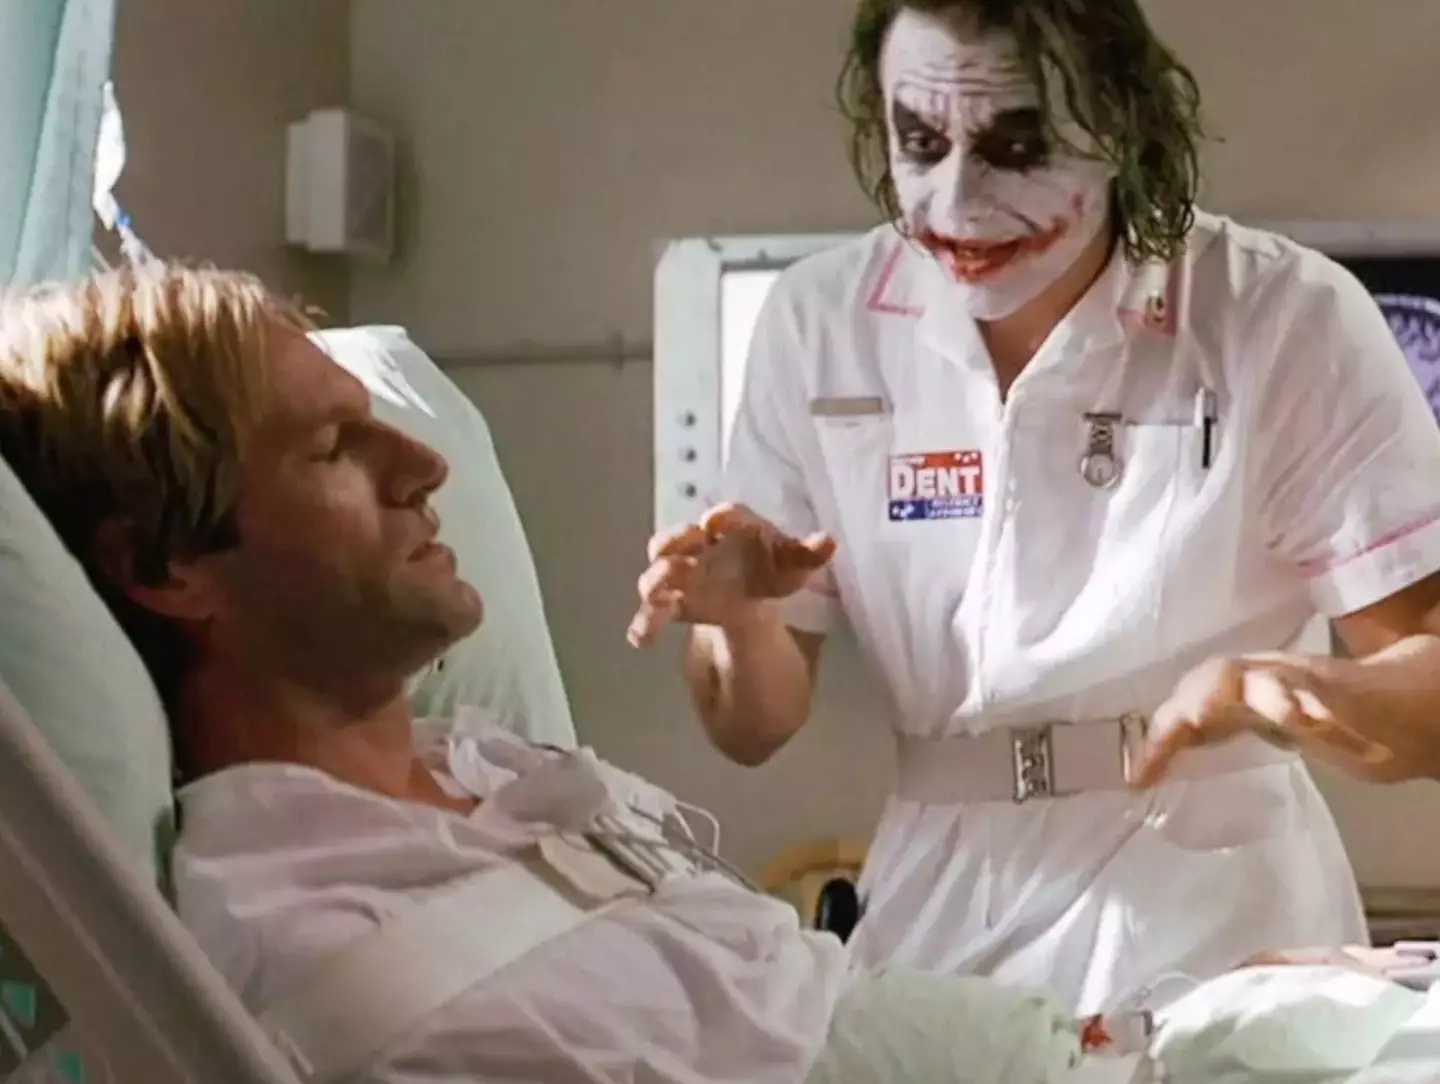 The Joker's uniform had a special tribute to Heath Ledger's daughter.